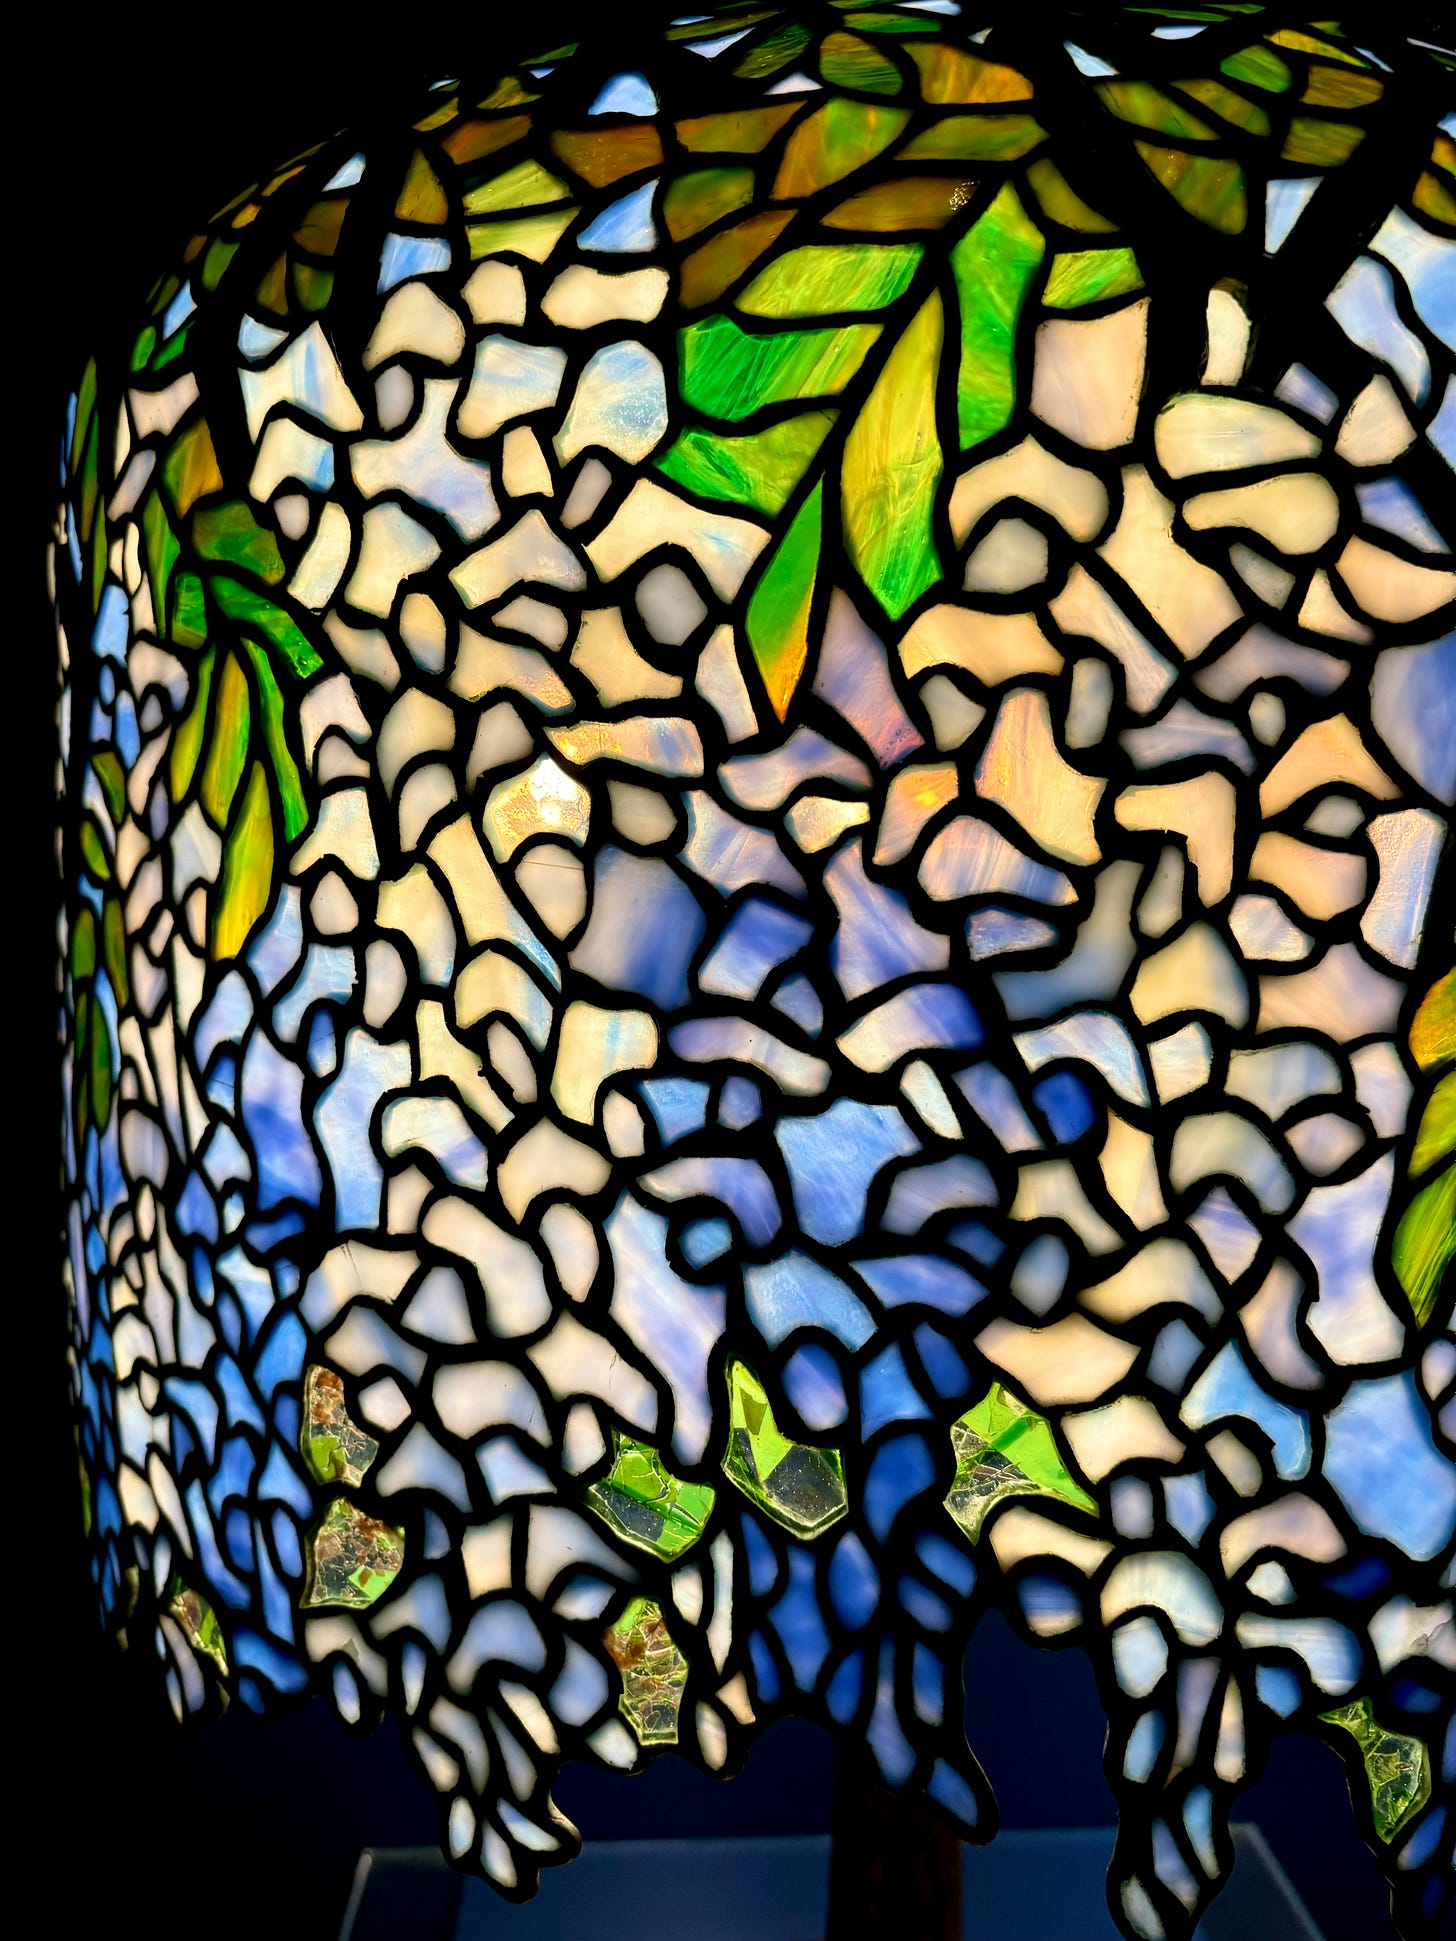 A close up of the wisteria lampshade, the glass tiles and lead linking them.